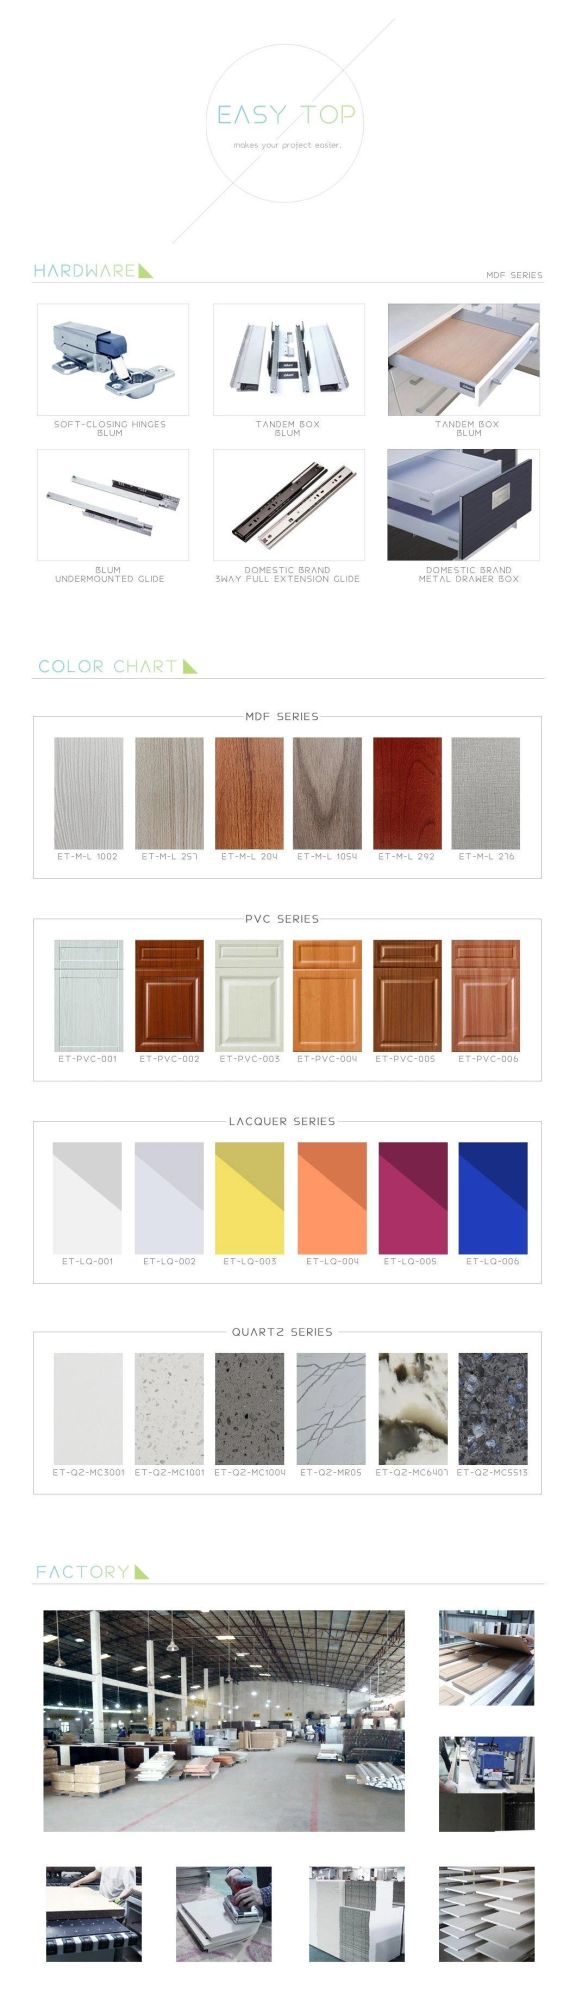 Lacquer Customized Size with Different Material Ready to Assemble Cabinets for Kitchen Furniture